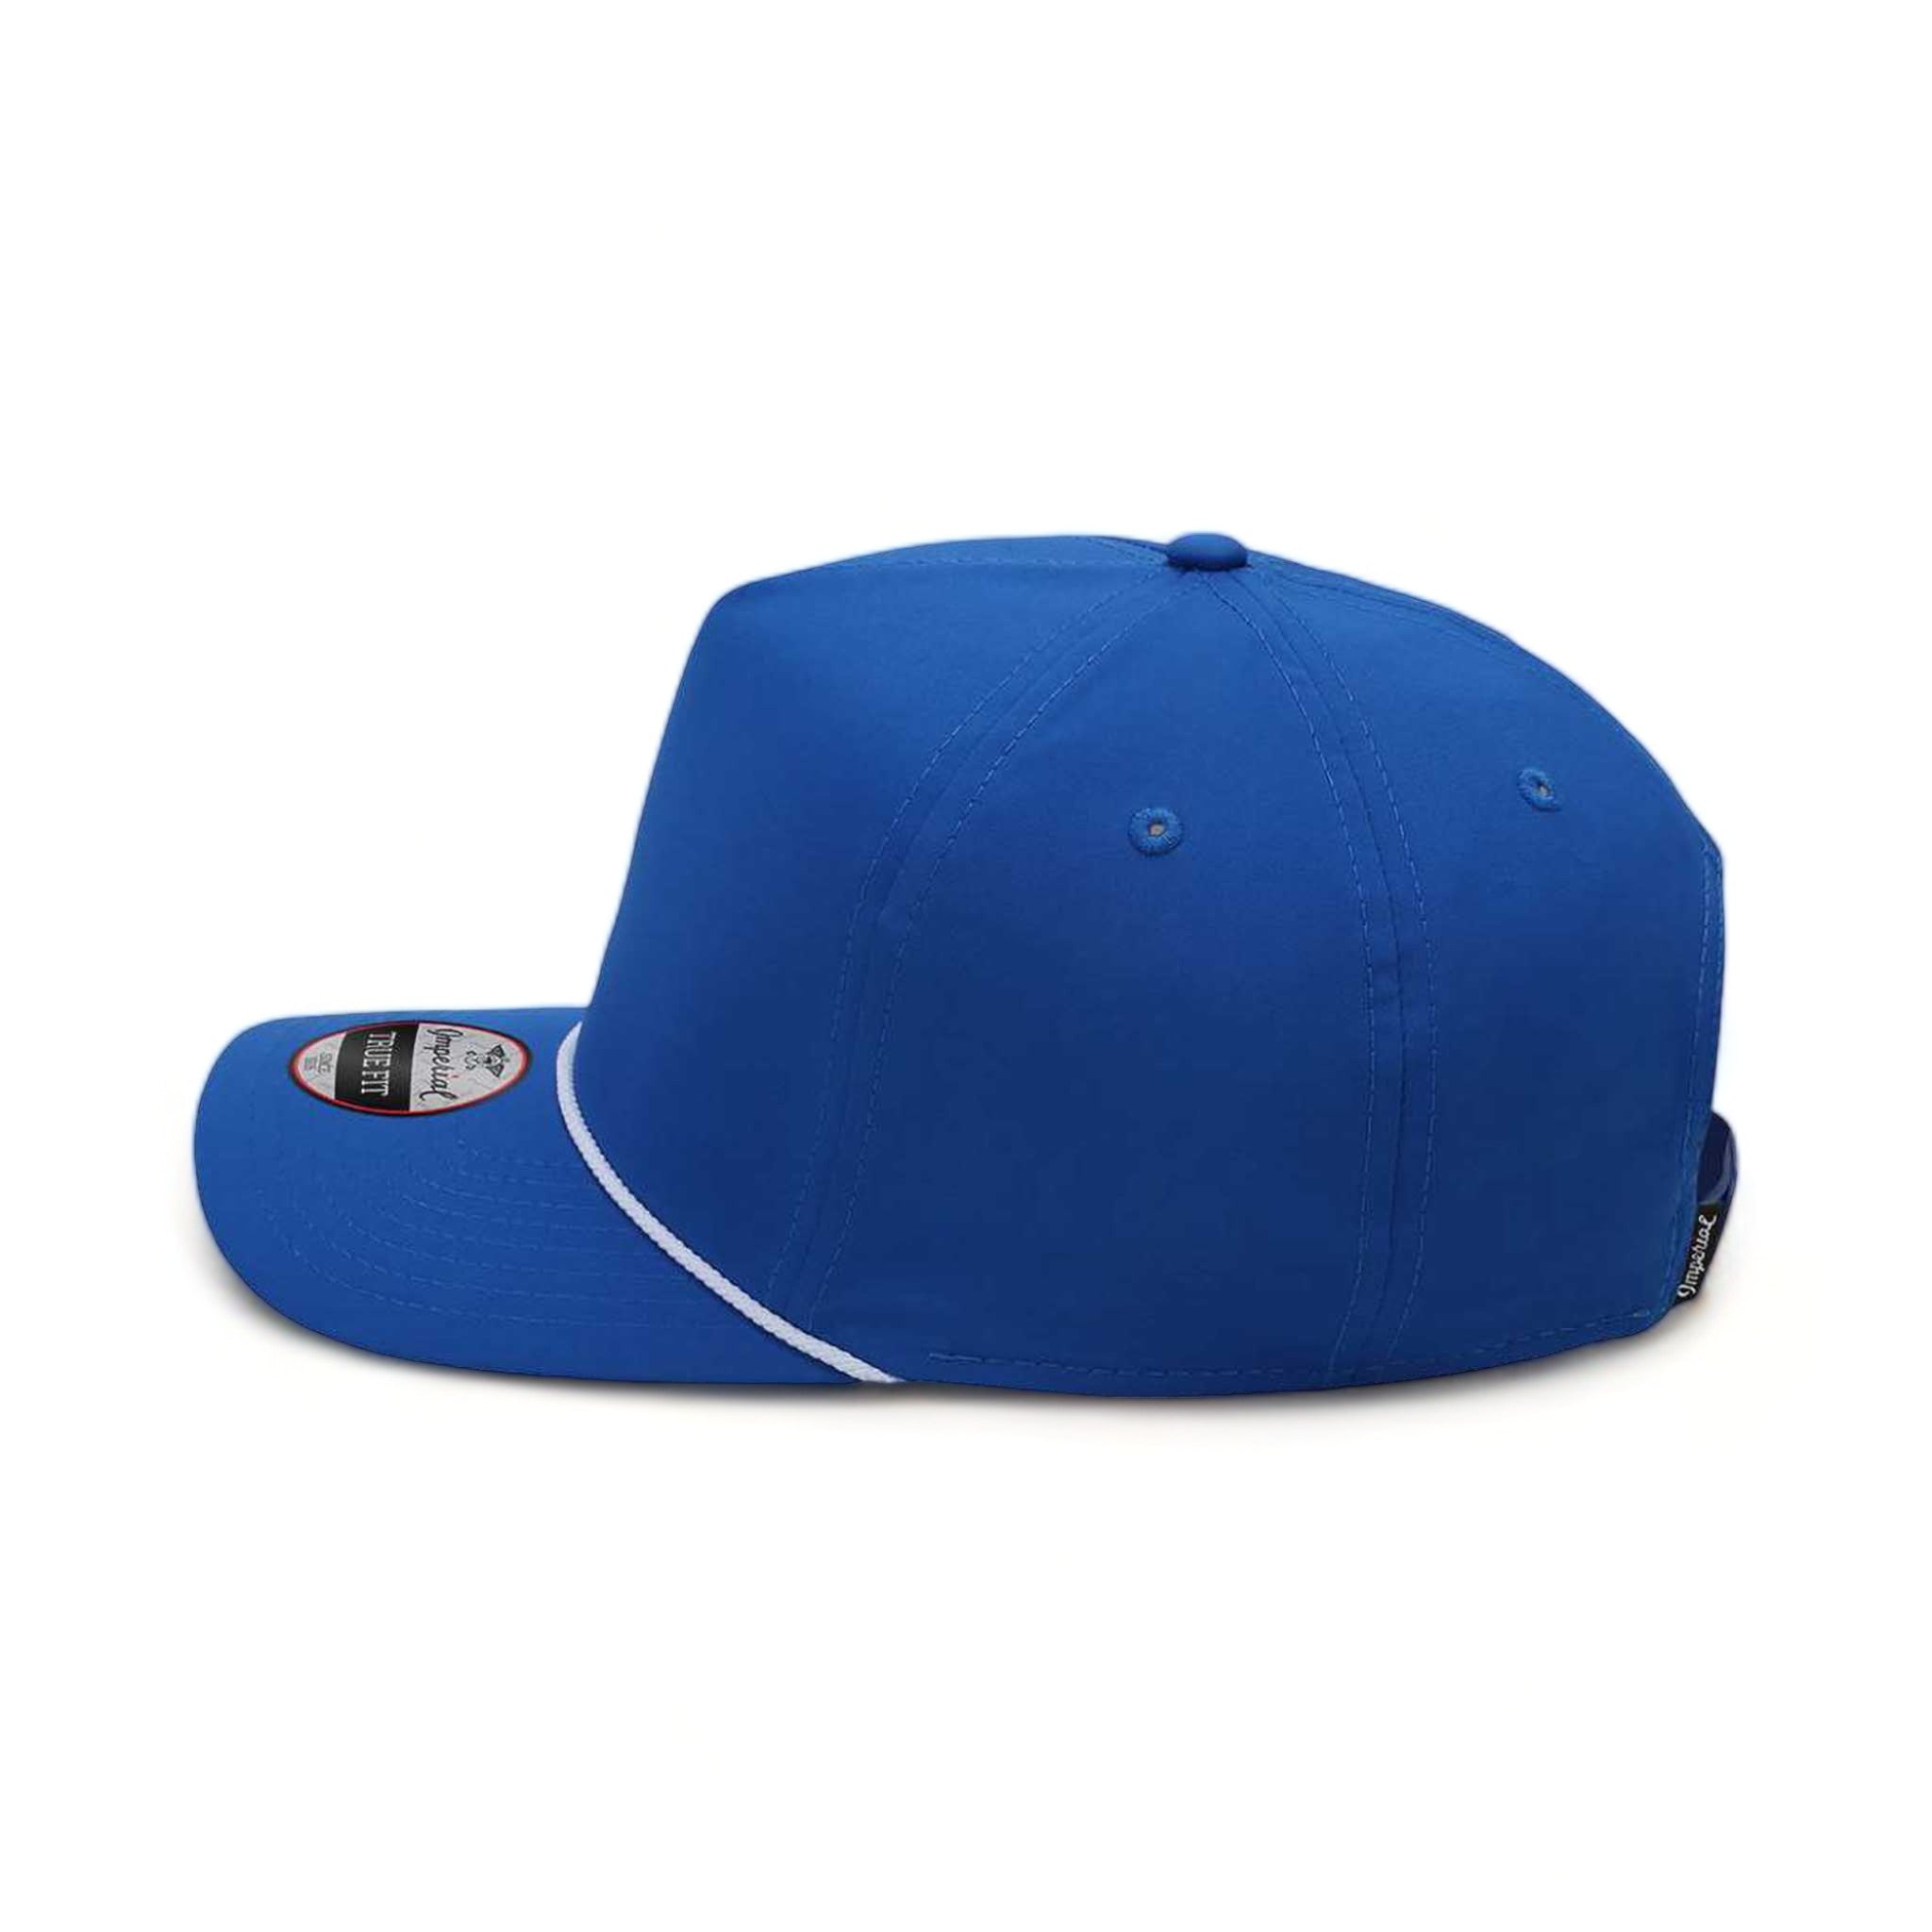 Side view of Imperial 5054 custom hat in royal and white